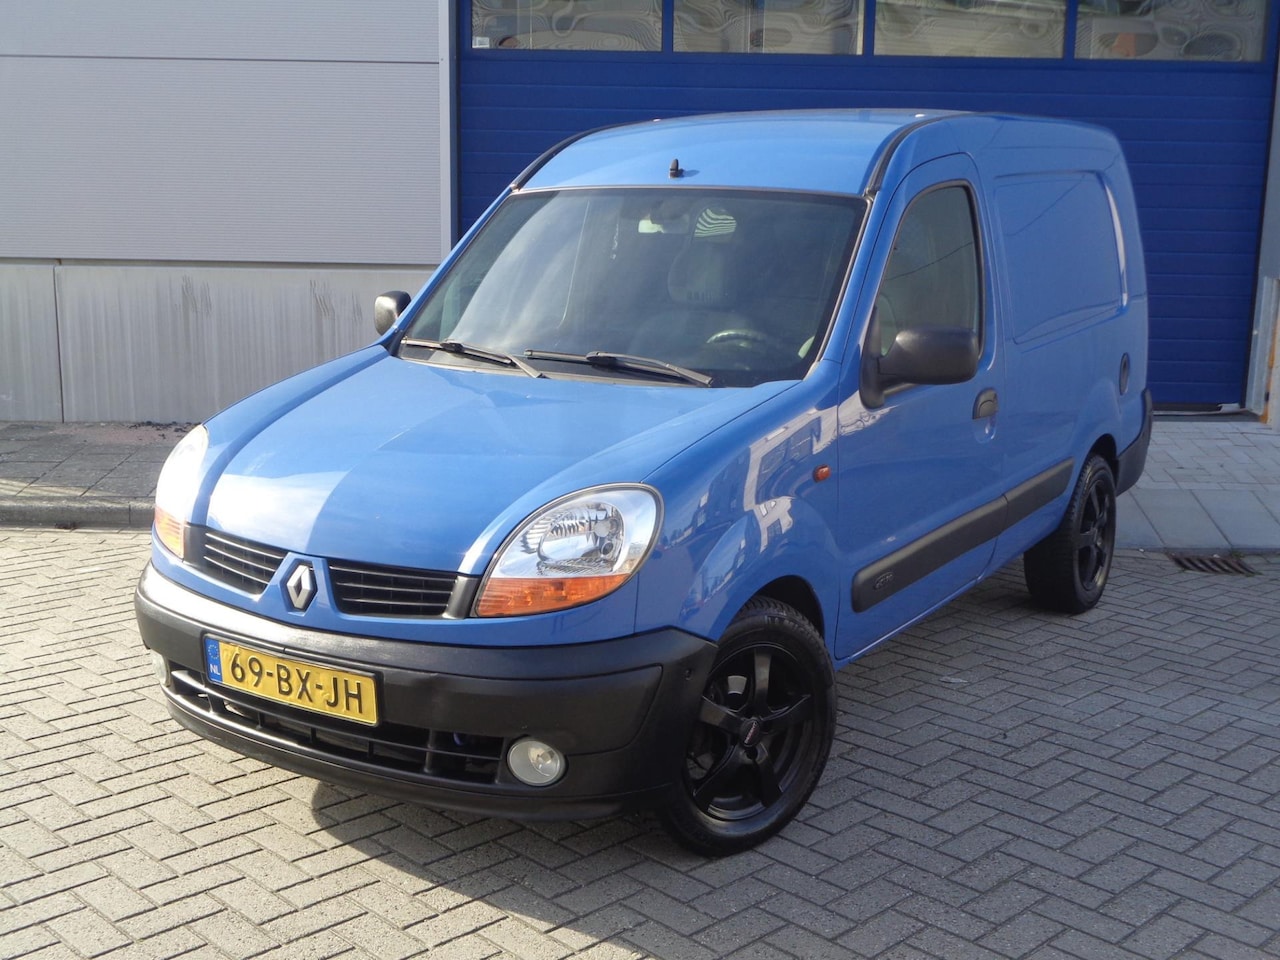 renault kangoo express diesel manual blue red used – Search for your used  car on the parking